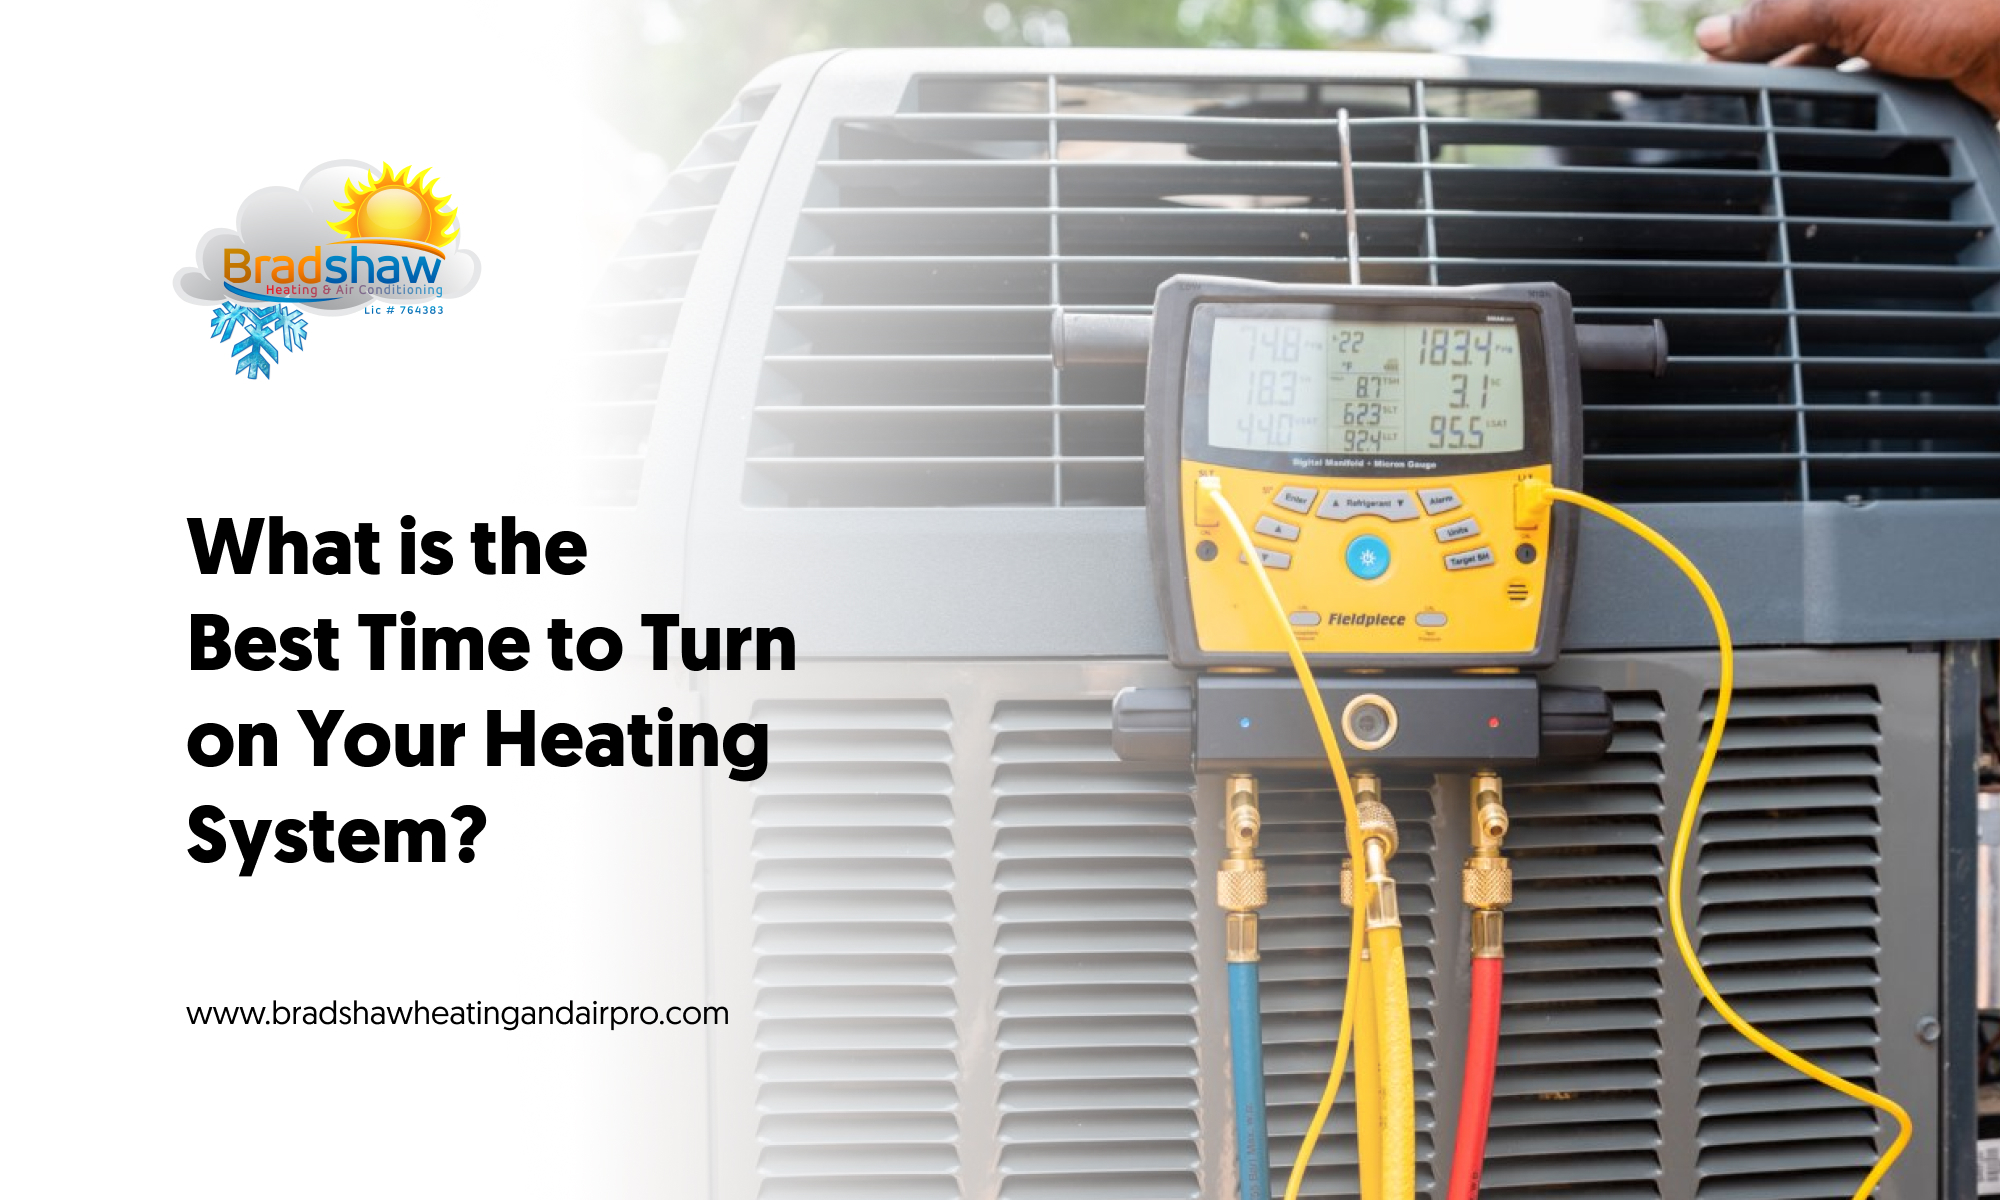 What is the Best Time to Turn on Your Heating System?